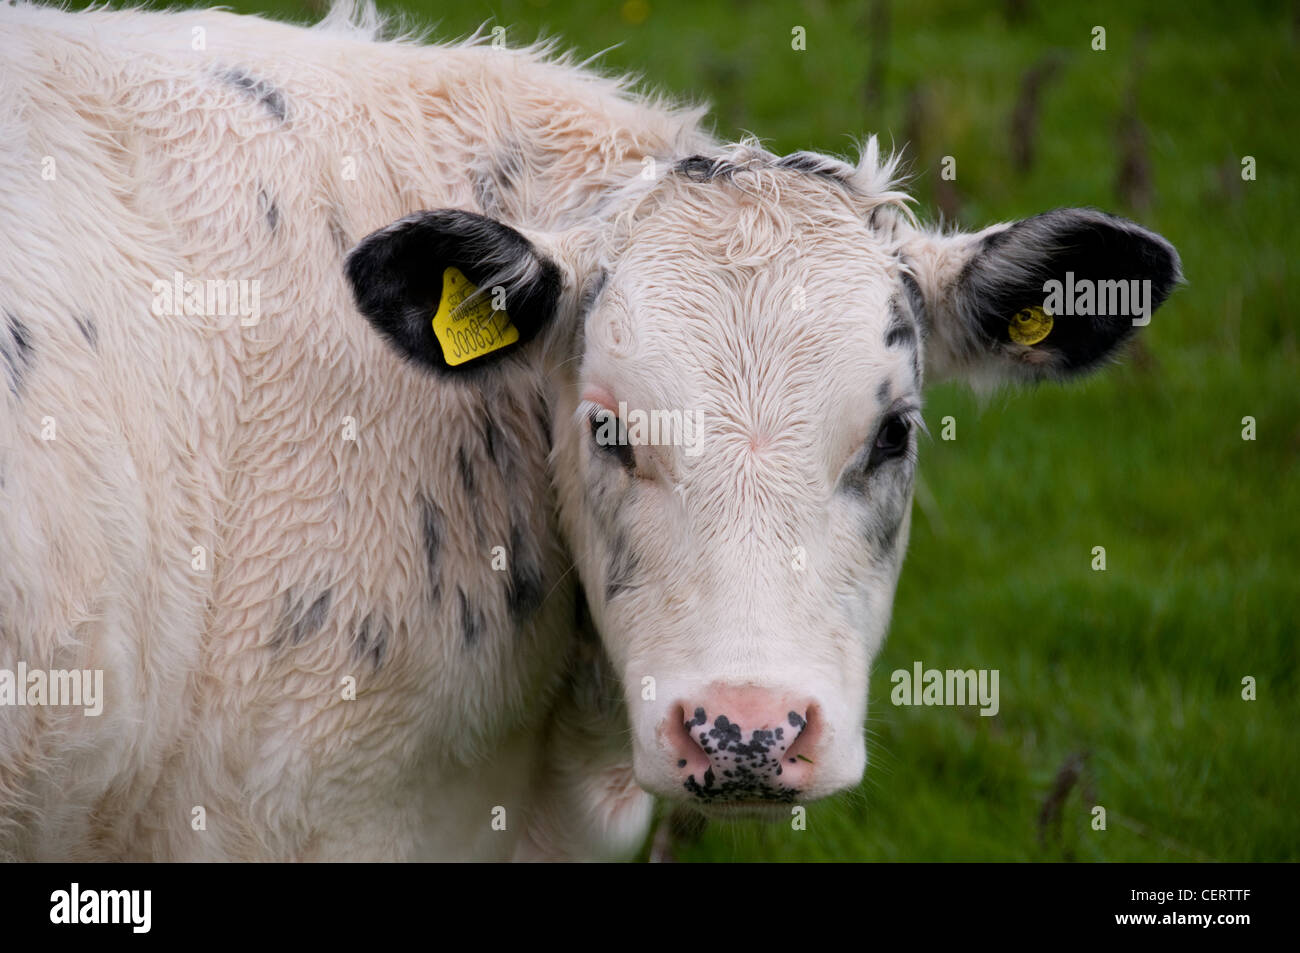 Cow with identification tags in the ears Stock Photo